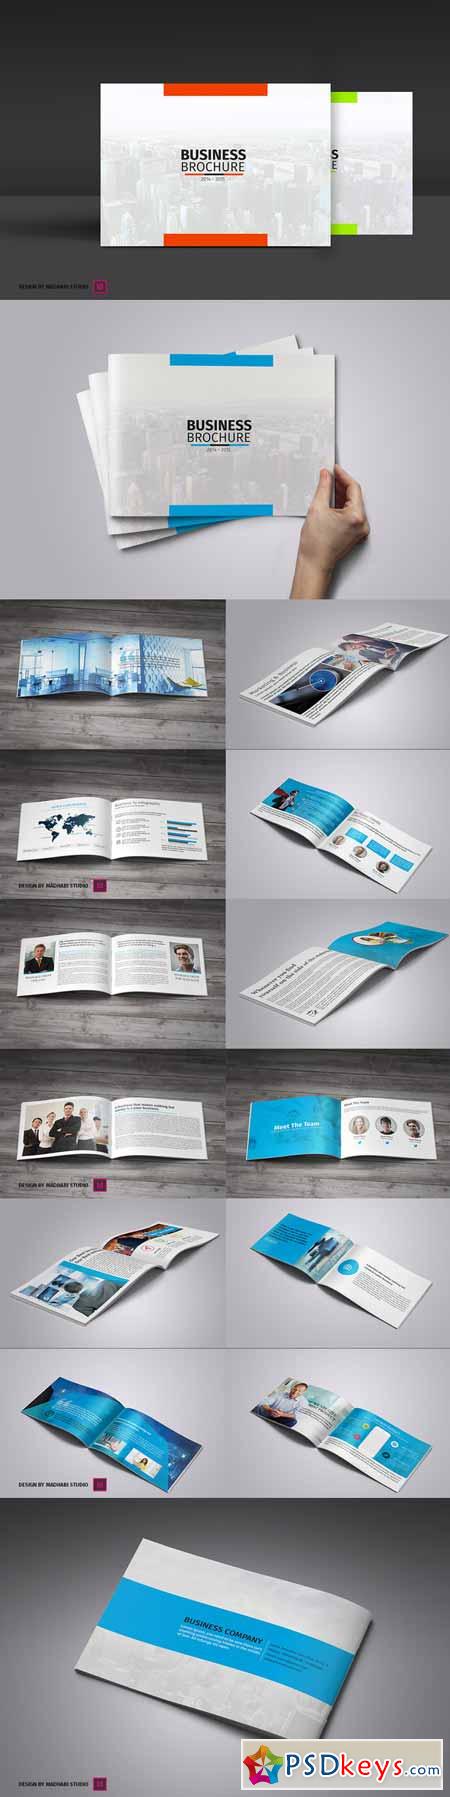 Corporate Brochure 30Pages 372845